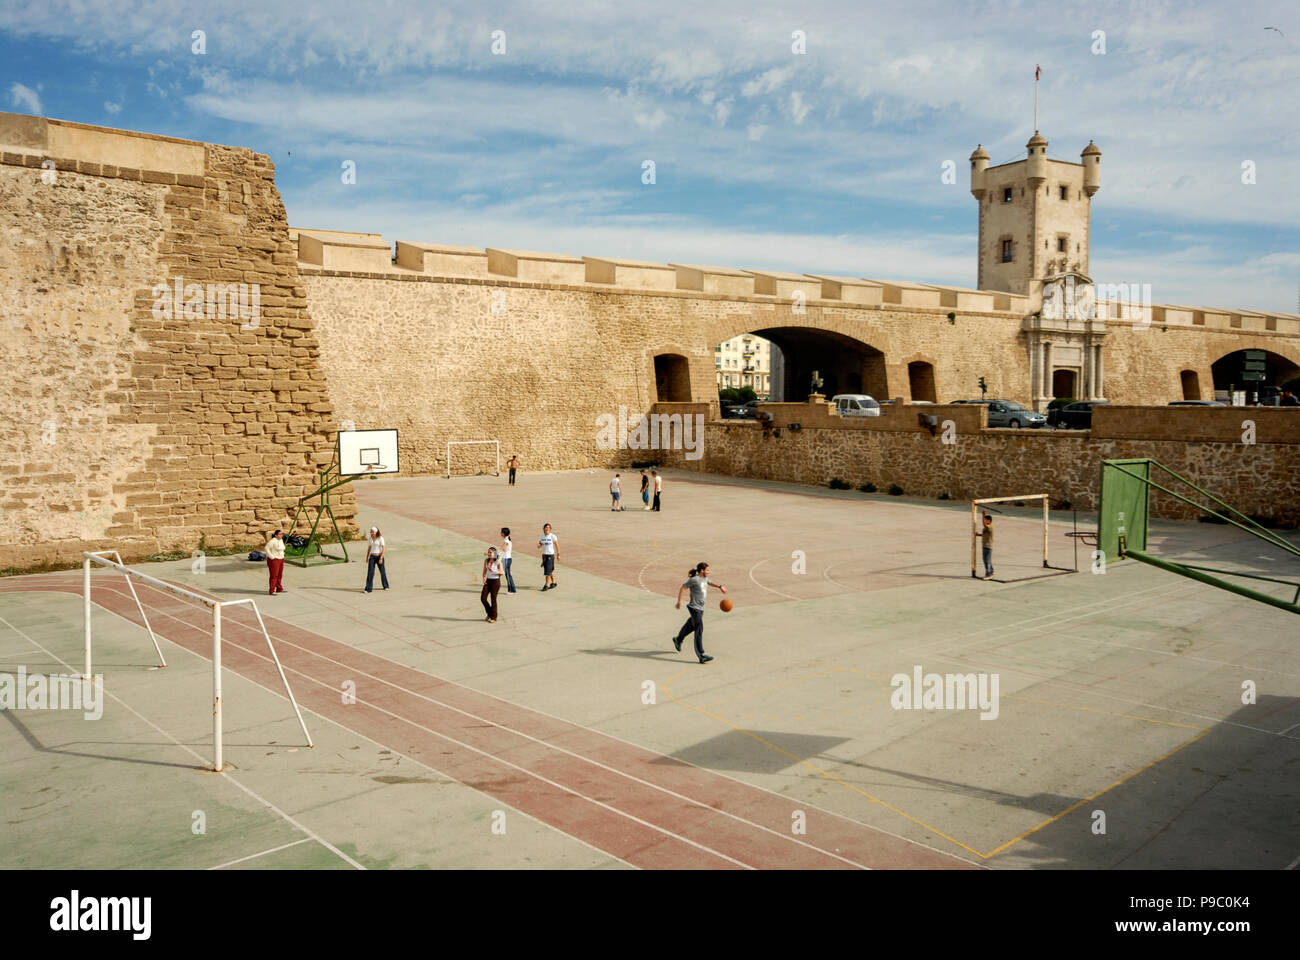 Children playing in a small sports playing area near the Puerta de Tierra, (Land gate) and ancient city wall in Cadiz, Andalusia, southern Spain   The Stock Photo